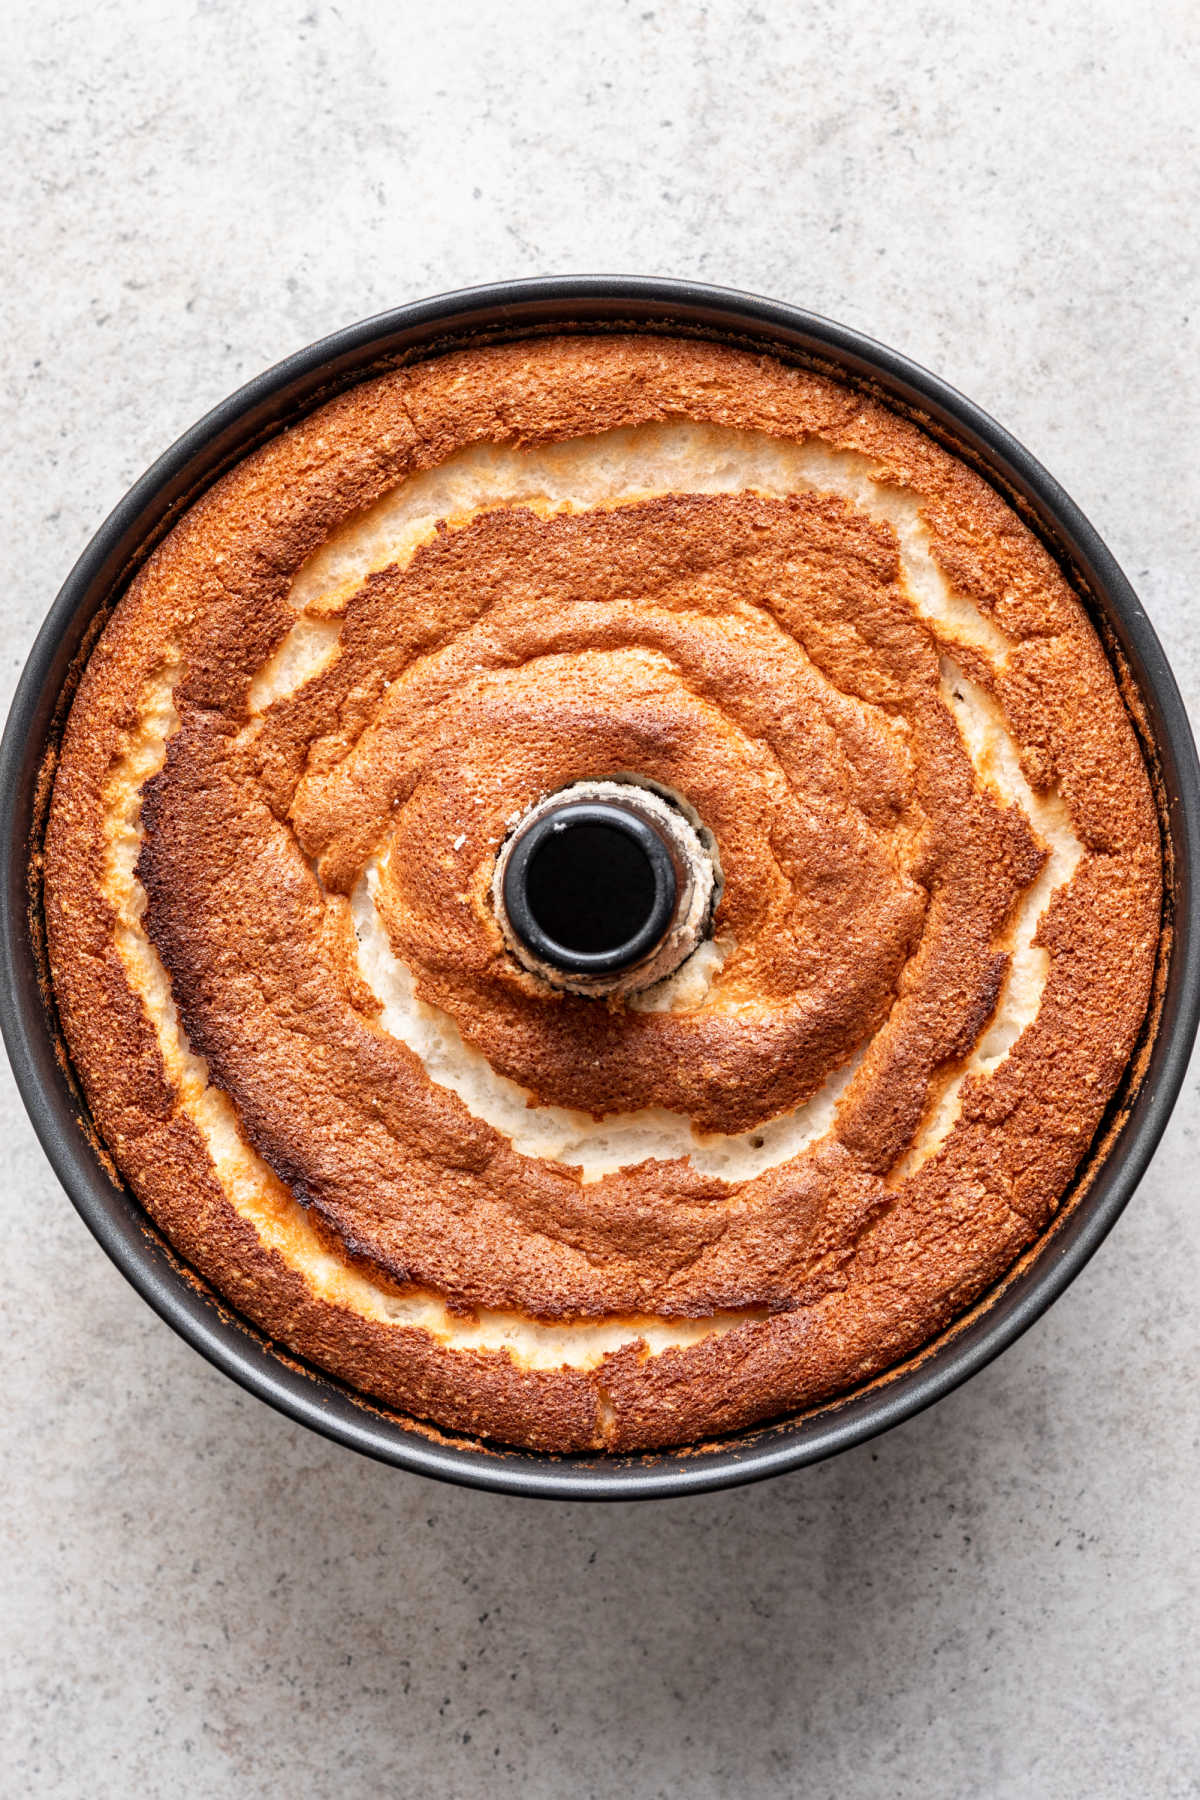 A baked angel food cake in a tube pan.